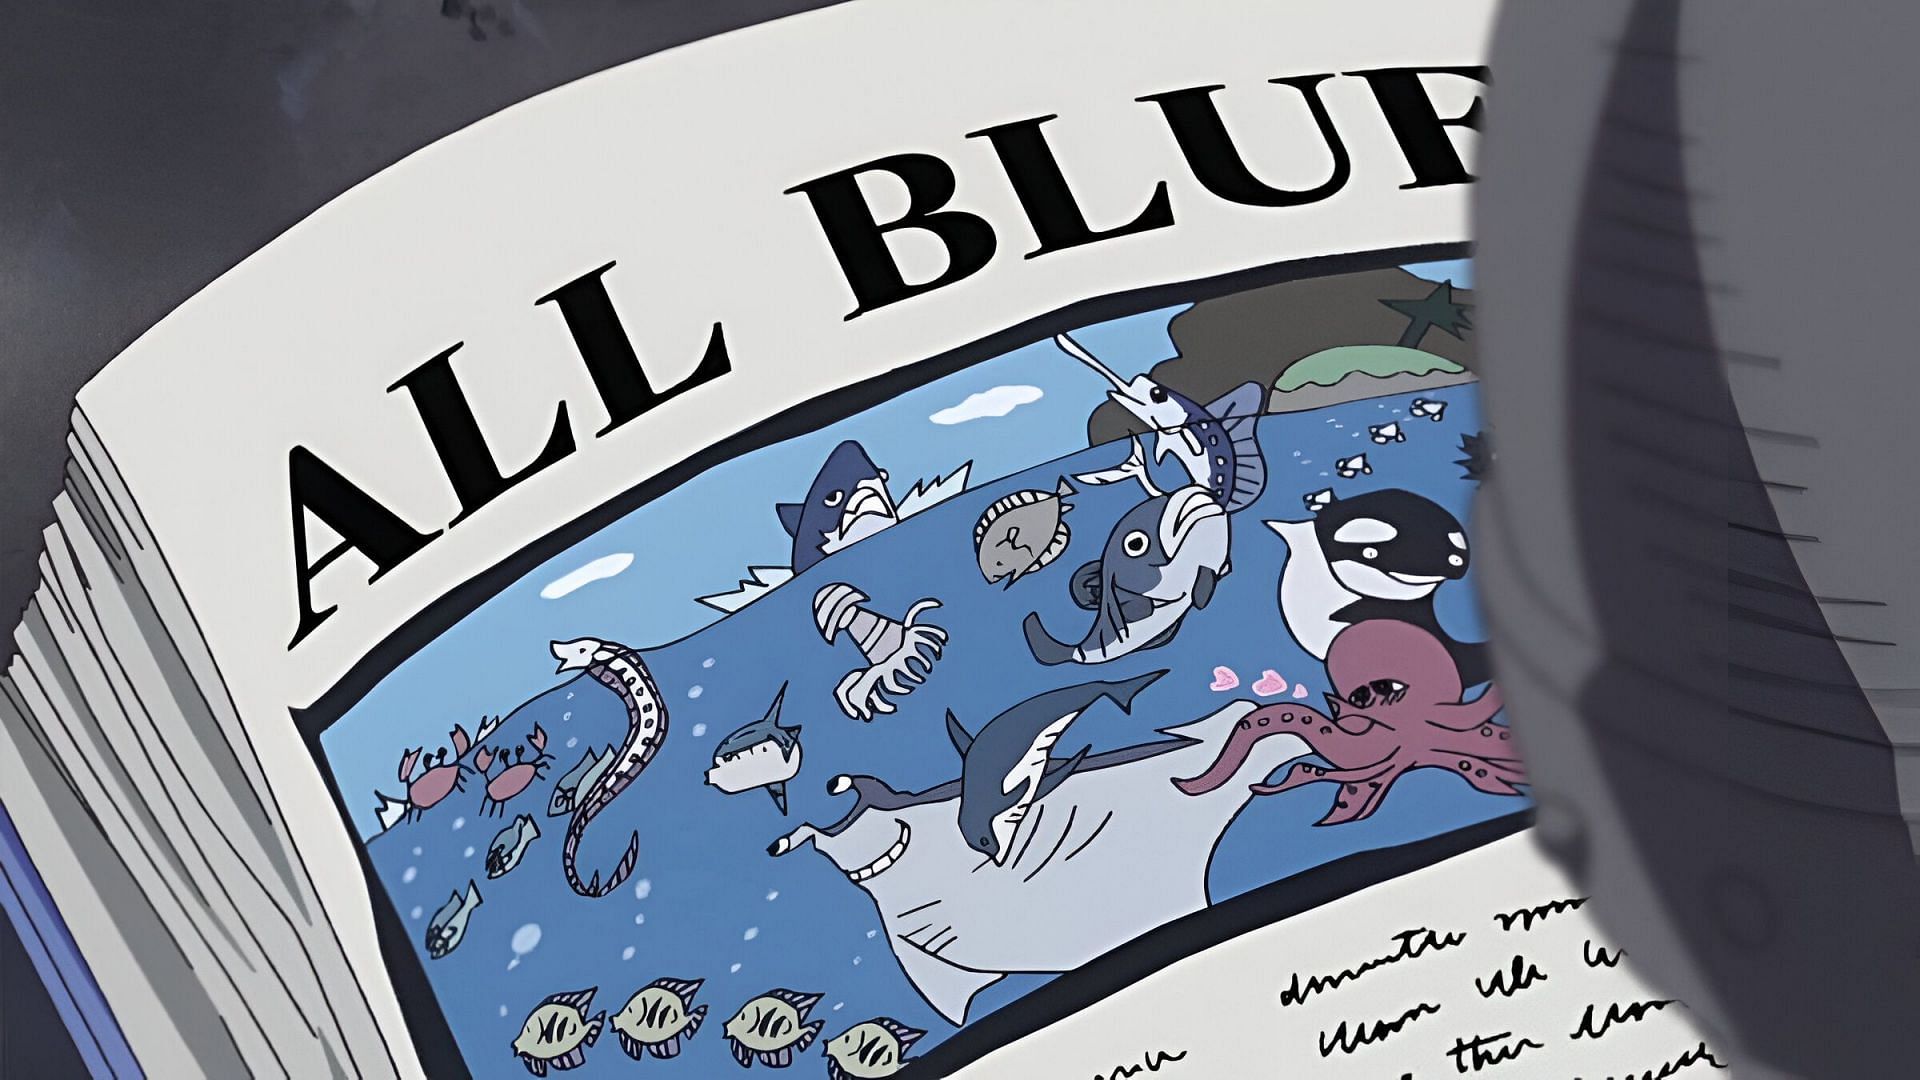 All Blue as seen in the anime (Image via Toei Animation)